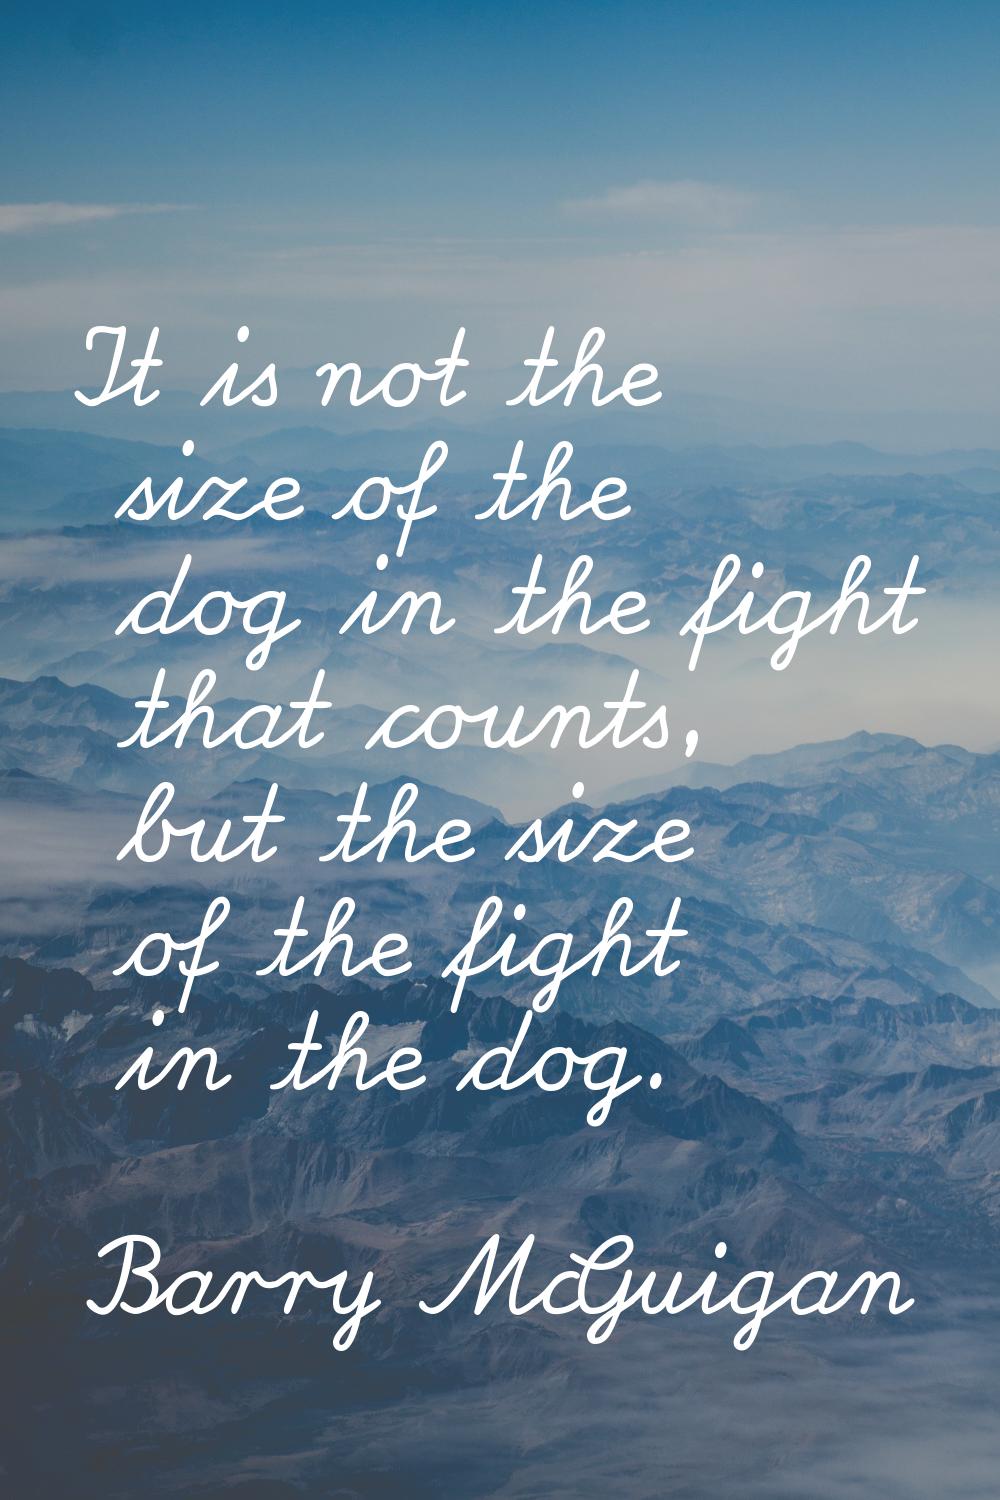 It is not the size of the dog in the fight that counts, but the size of the fight in the dog.